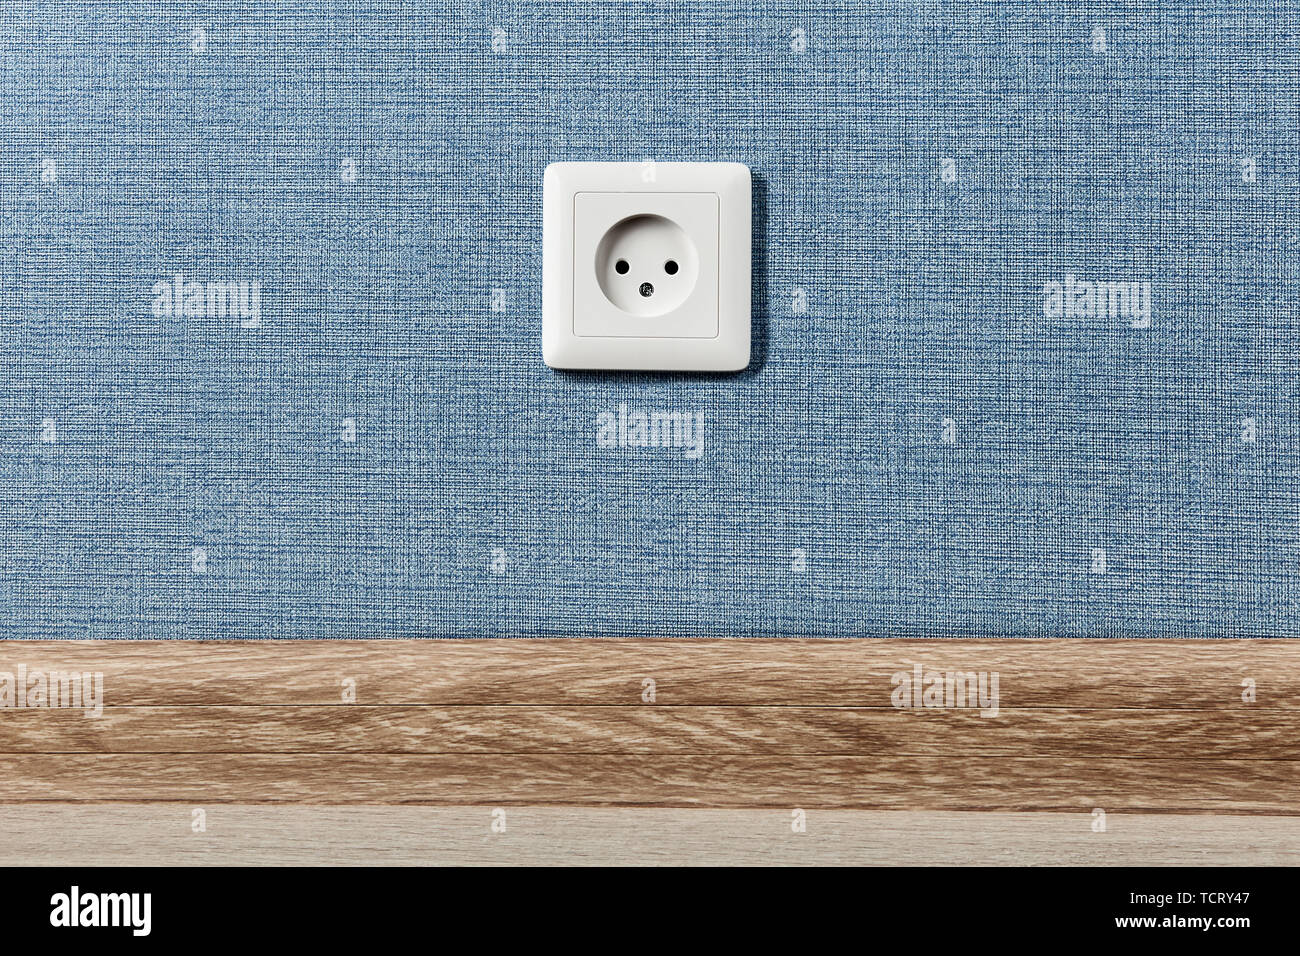 Euro electric outlet type C, electrical point of power in house, on the blue wall background. Stock Photo